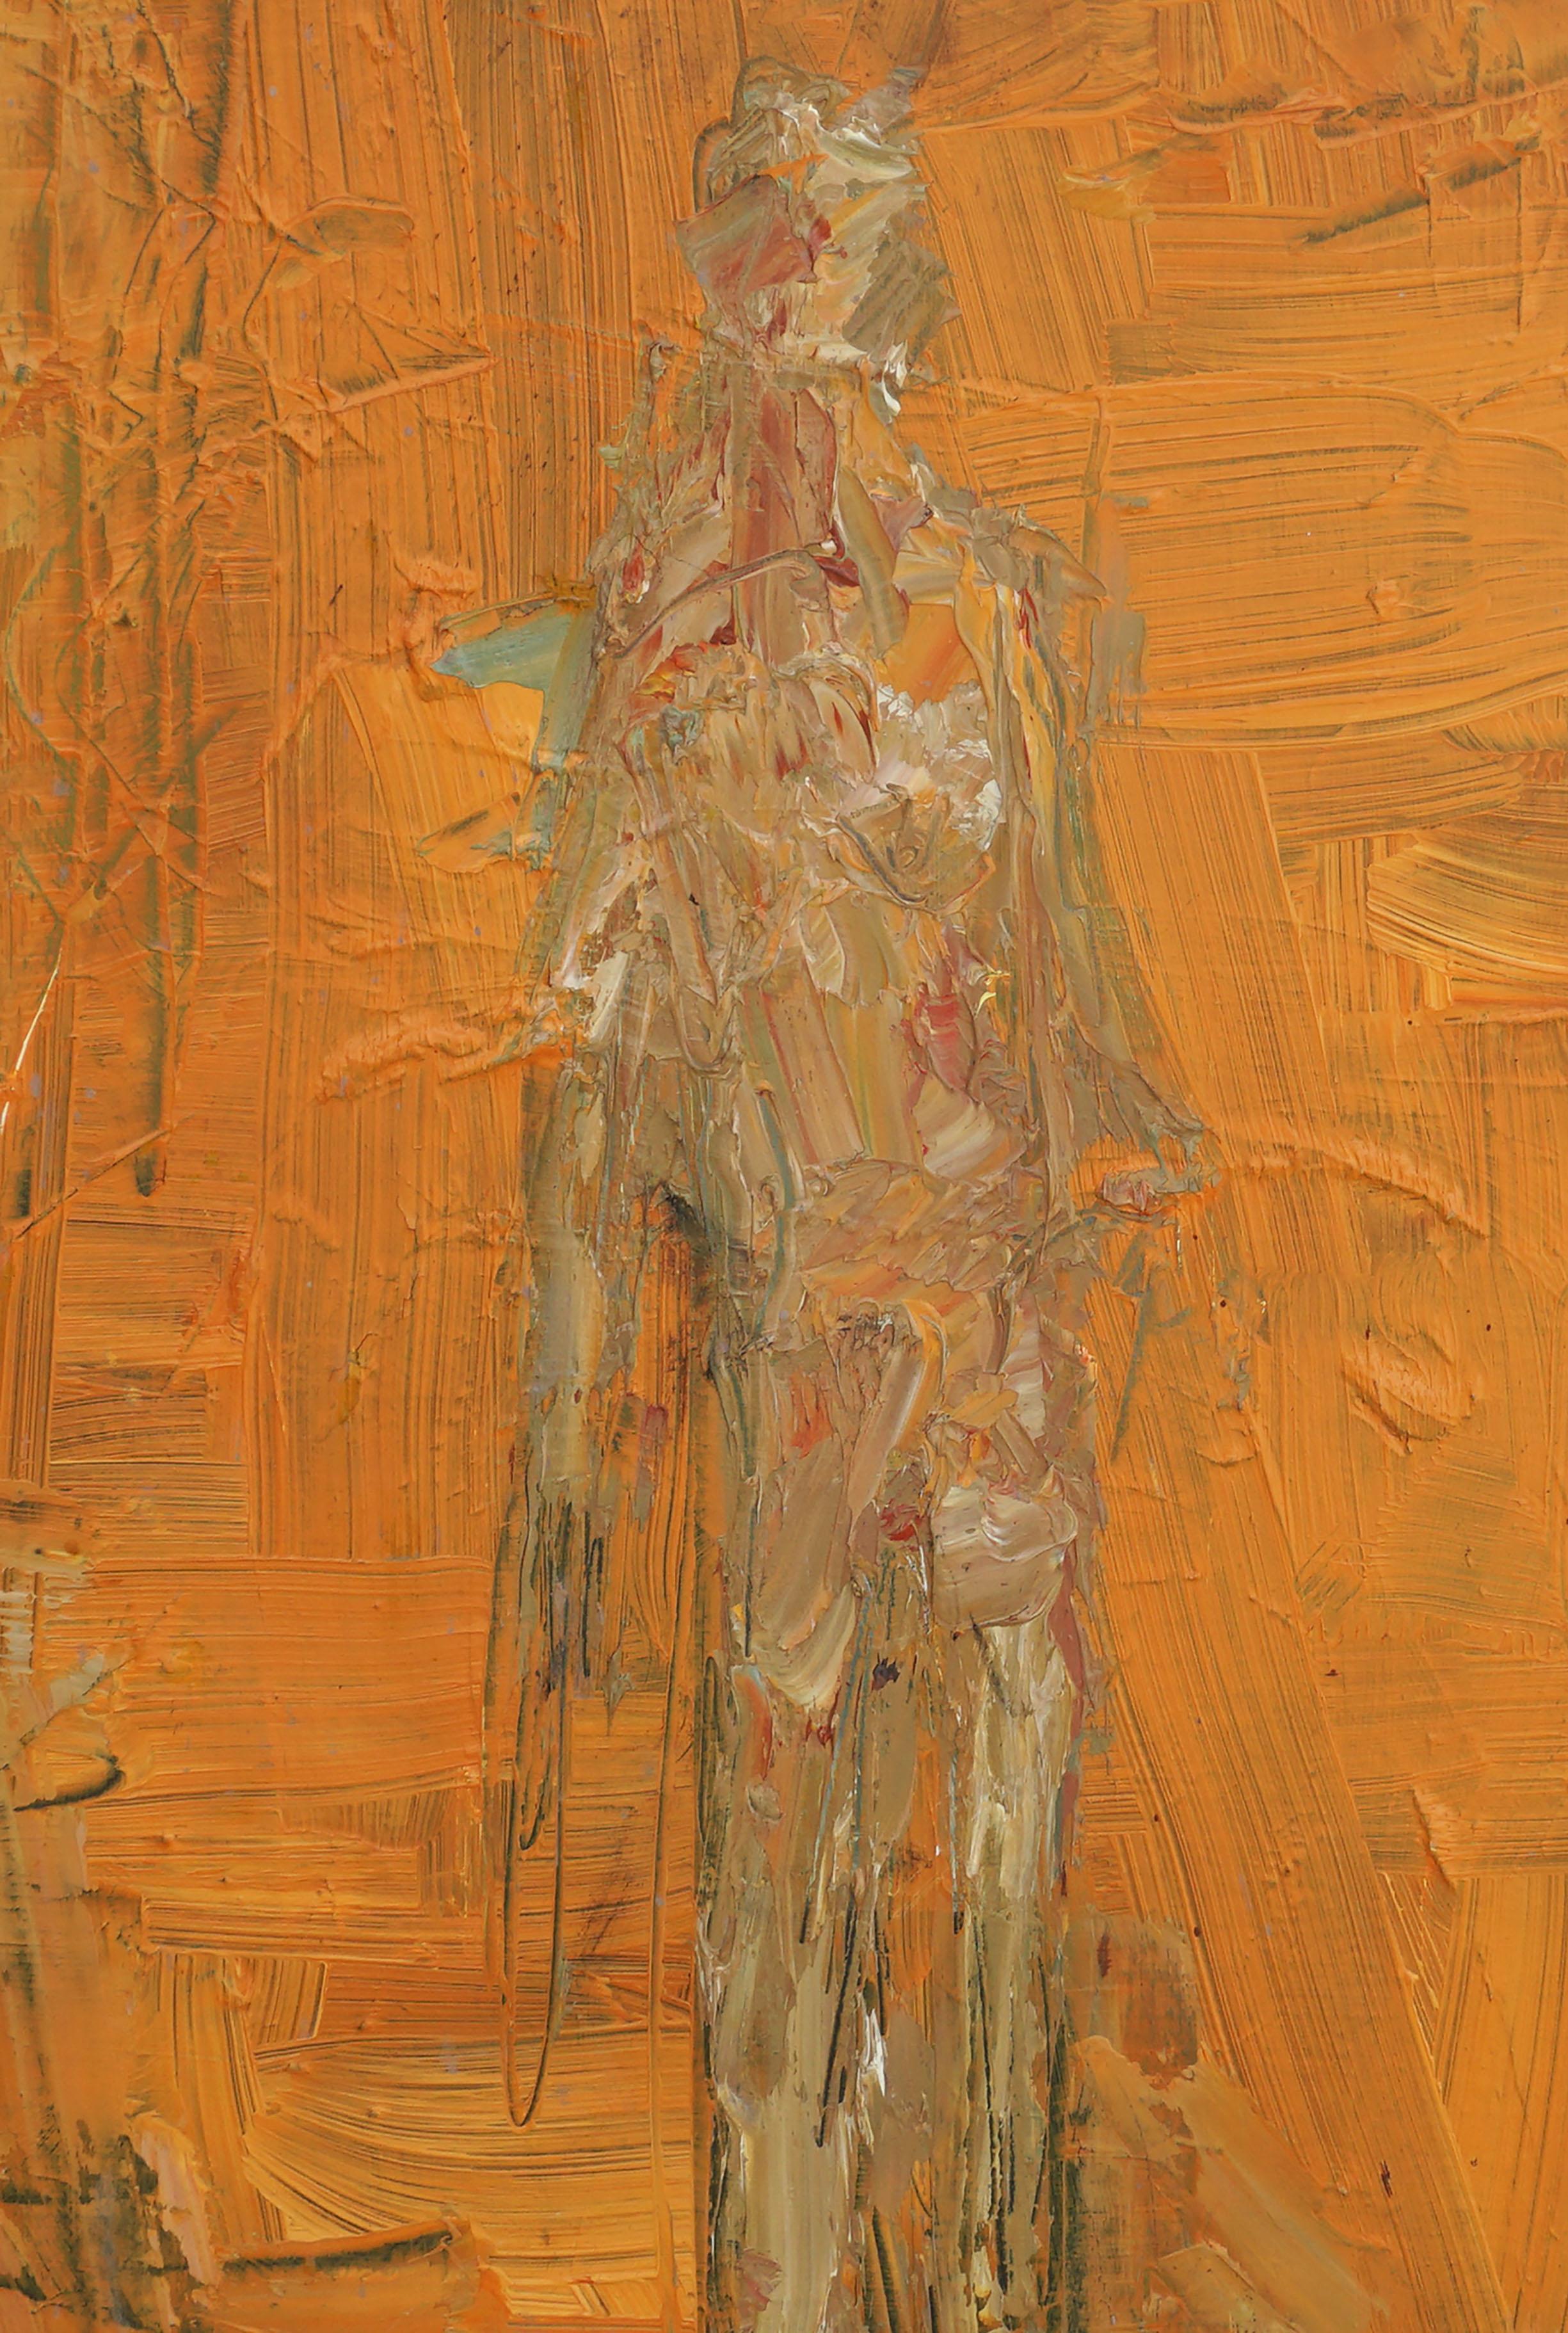 Abstract Expressionist Orange Man Figurative - Painting by Daniel David Fuentes